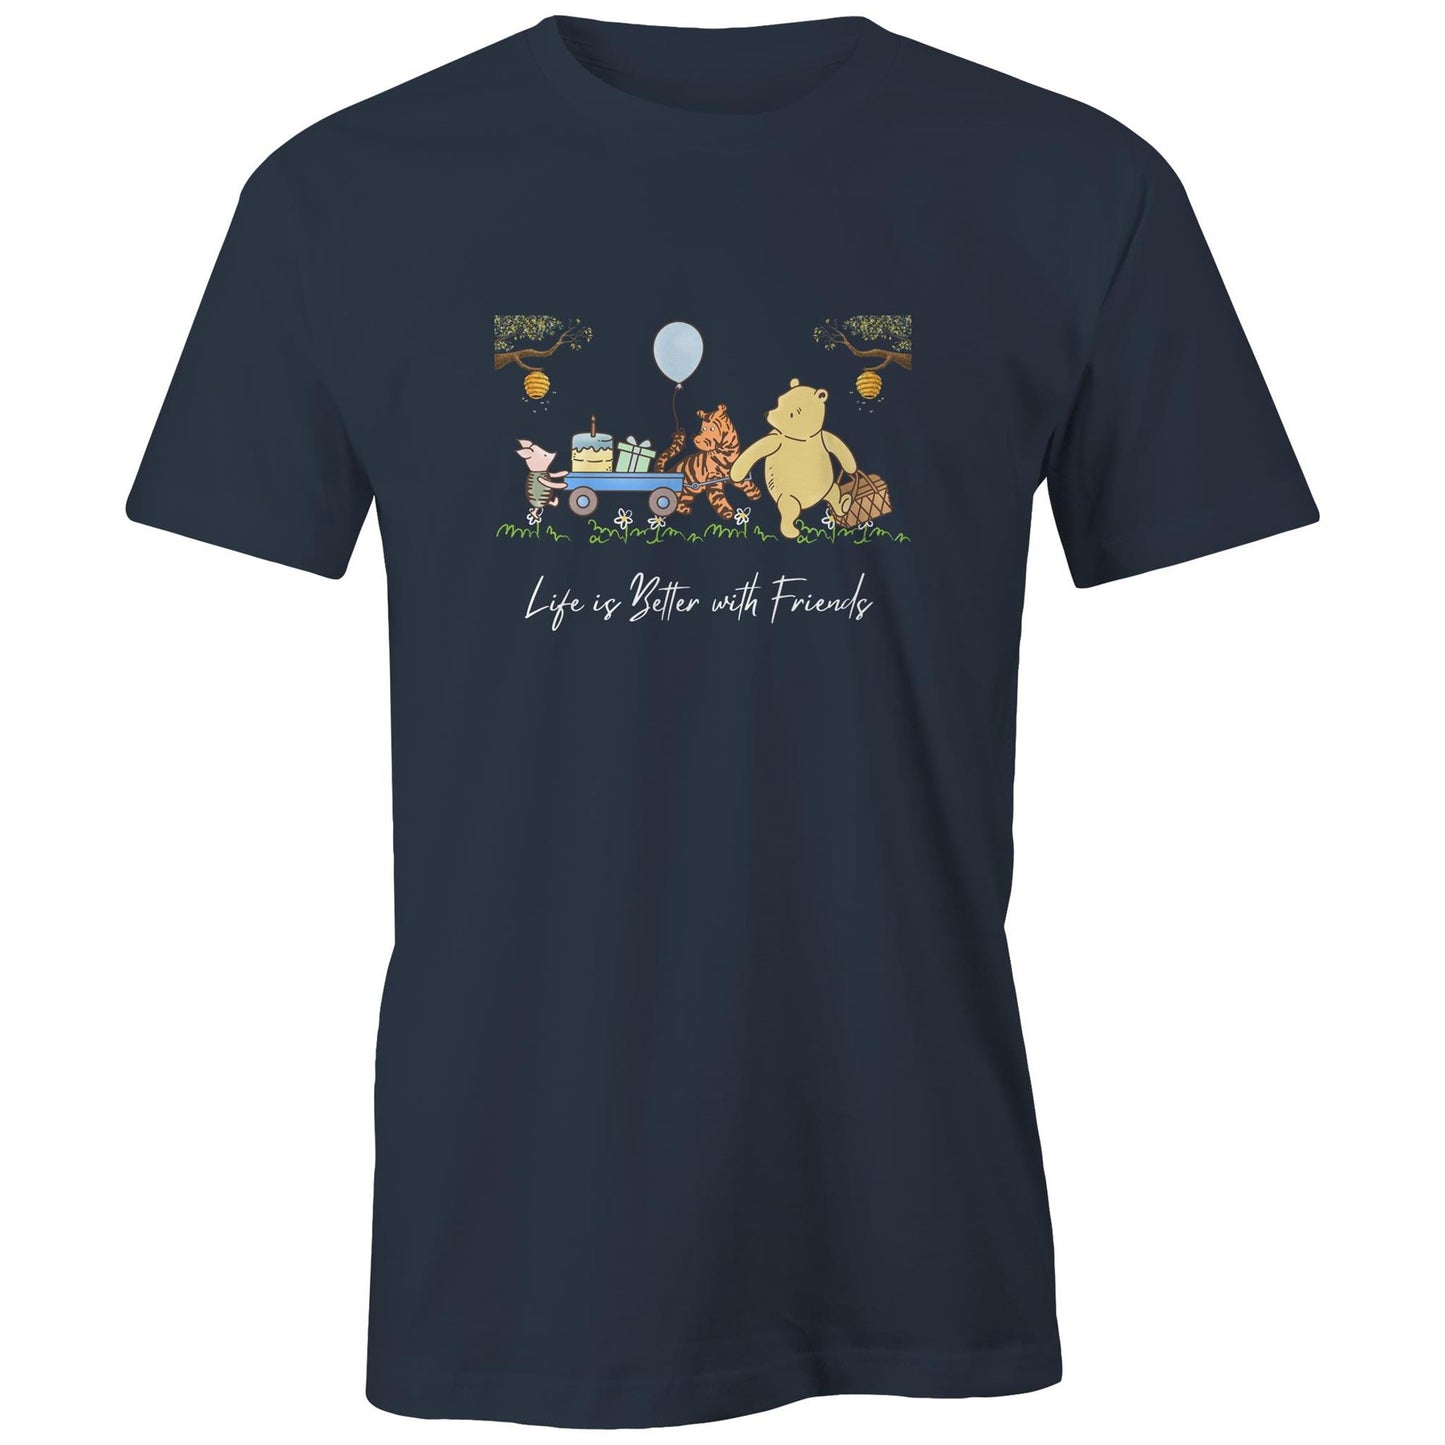 Pooh Bear and Friends- Men's Classic Tee